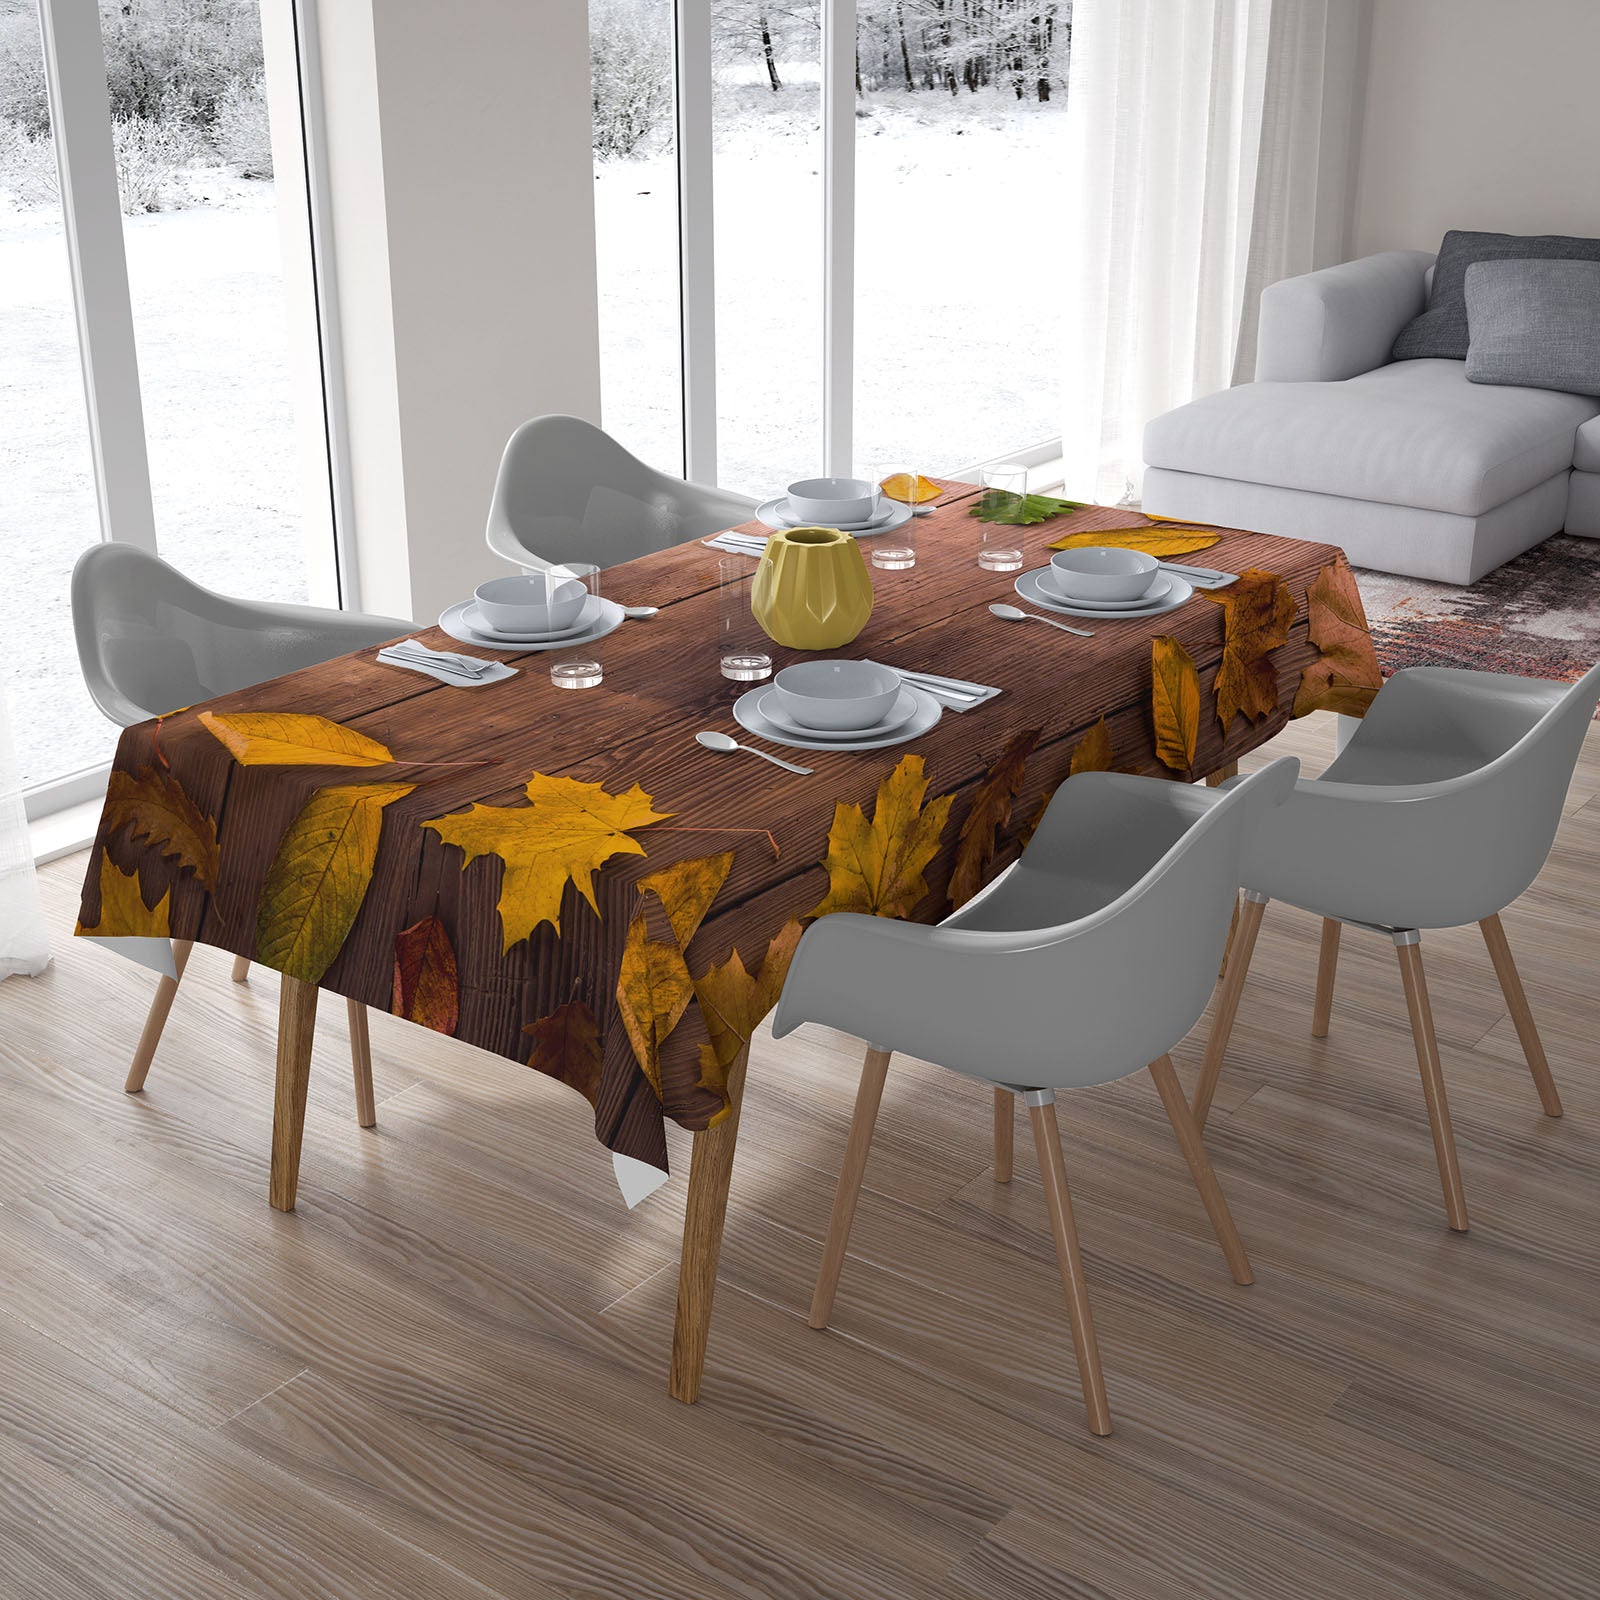 Tablecloth Autumn Leaves on Boards